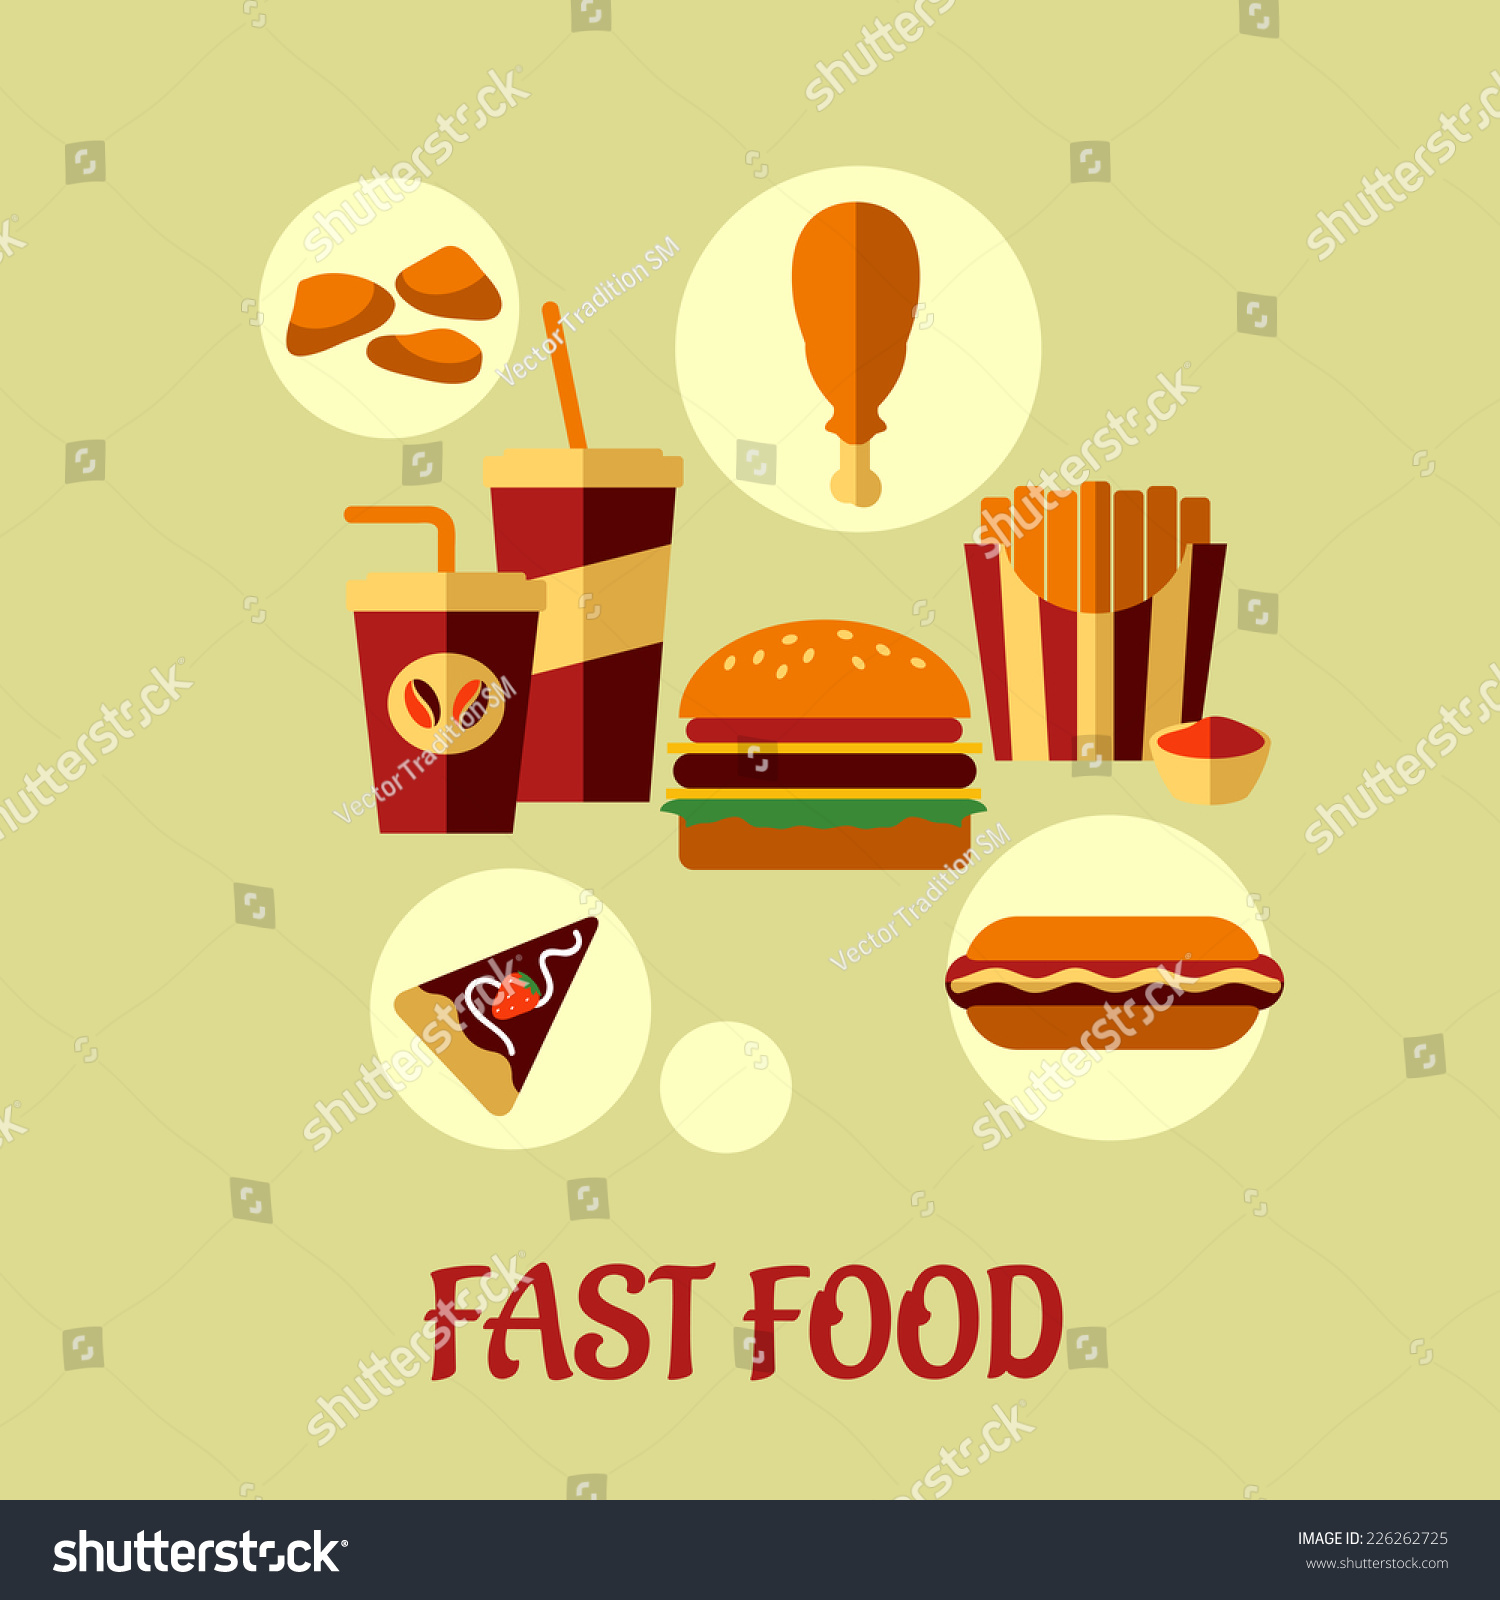 Fast Food Flat Poster Design Colorful Stock Vector 226262725 - Shutterstock